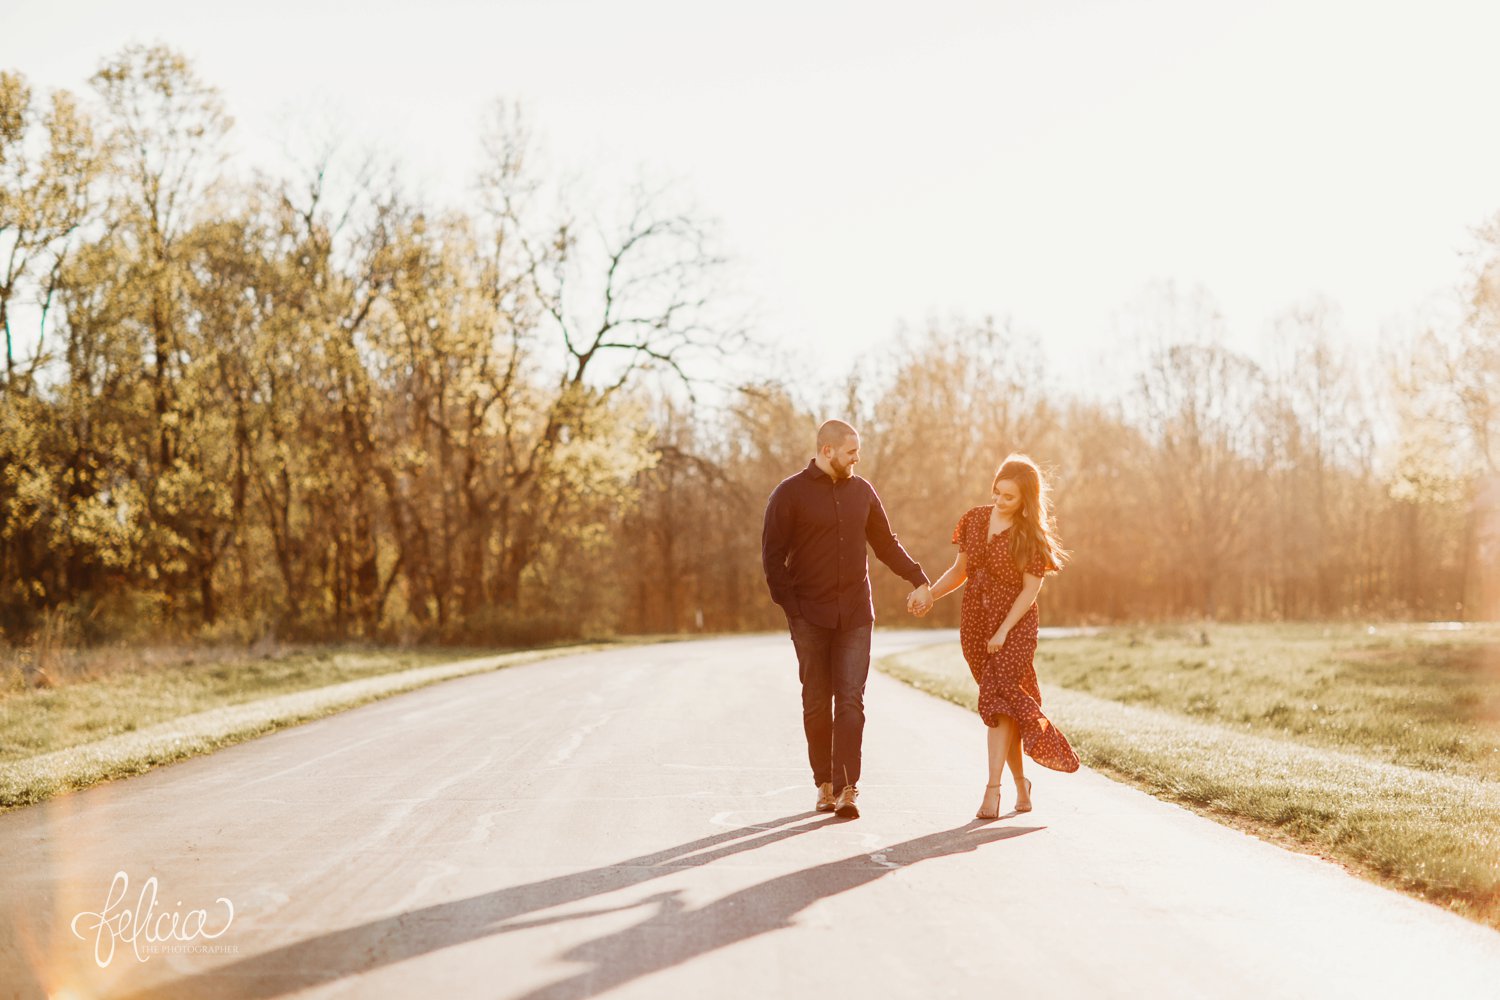 images by feliciathephotographer.com | Burr Oak Woods | engagement photos | wedding photographer | engagement photographer | field | sunrise | road | walking | holding hands | candid | posed | posing | smiling | laughing | laughter | love | happy | 